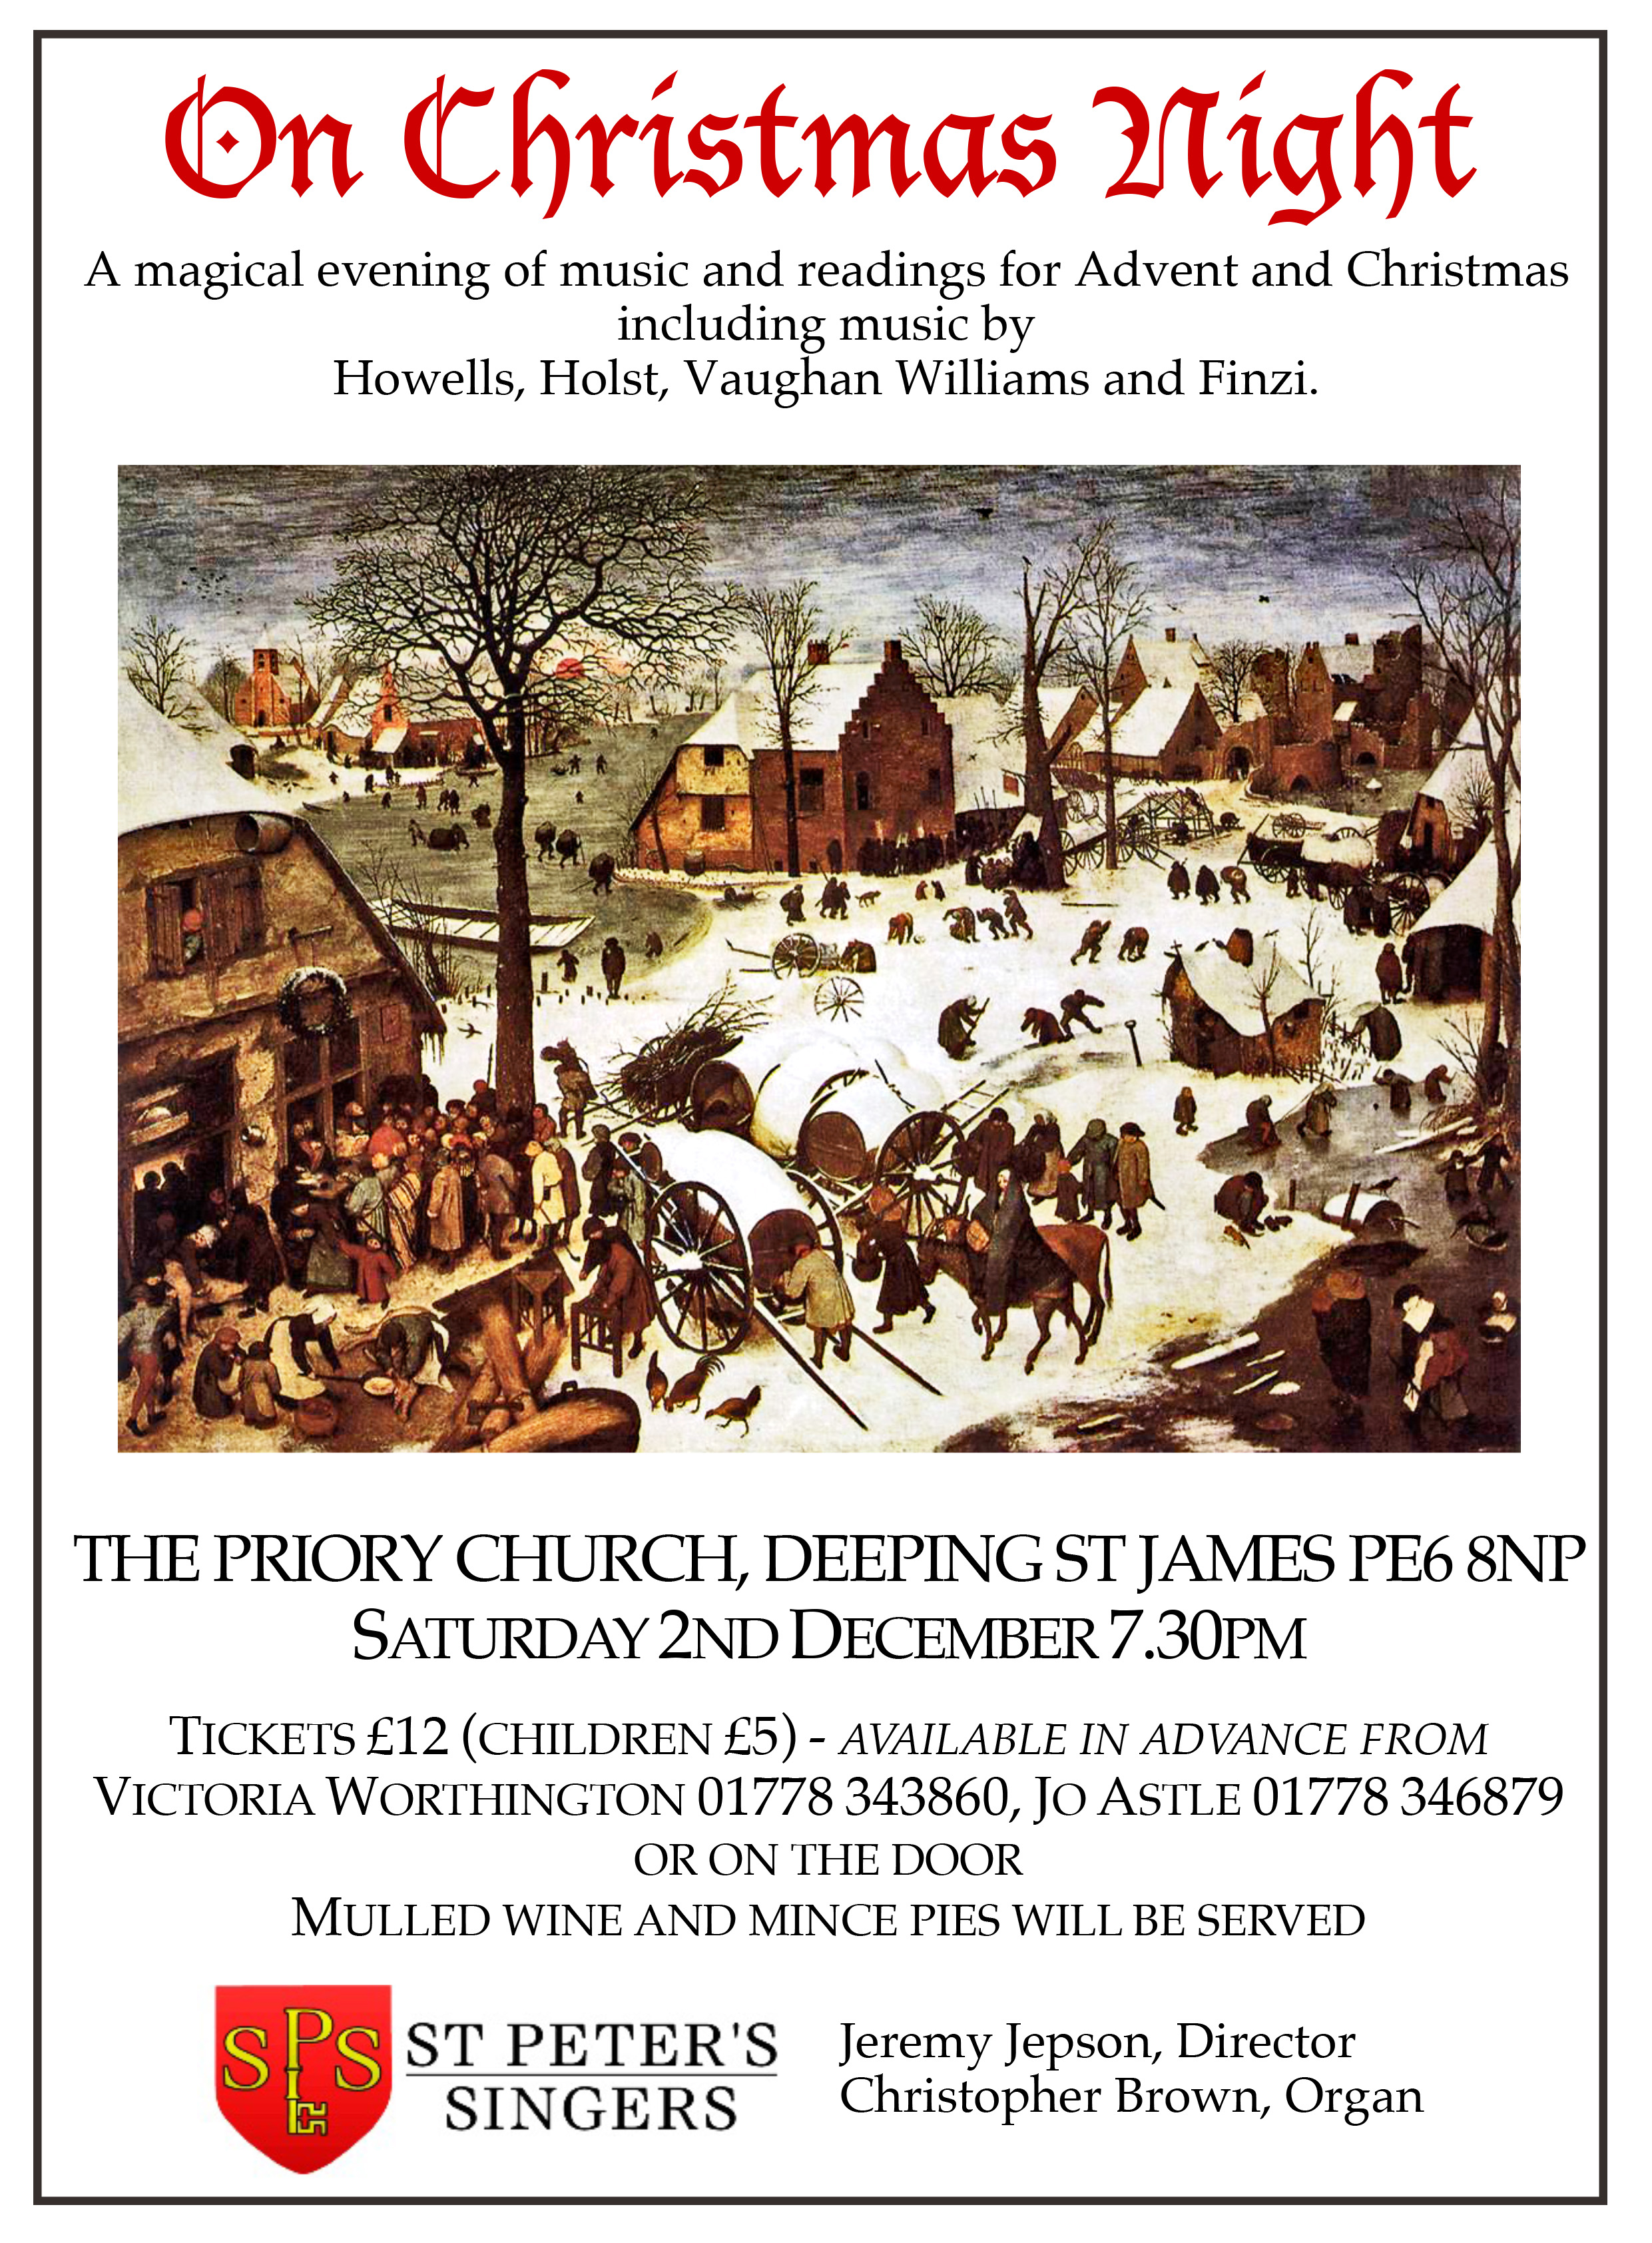 St Peter's Singers Christmas Concert Poster